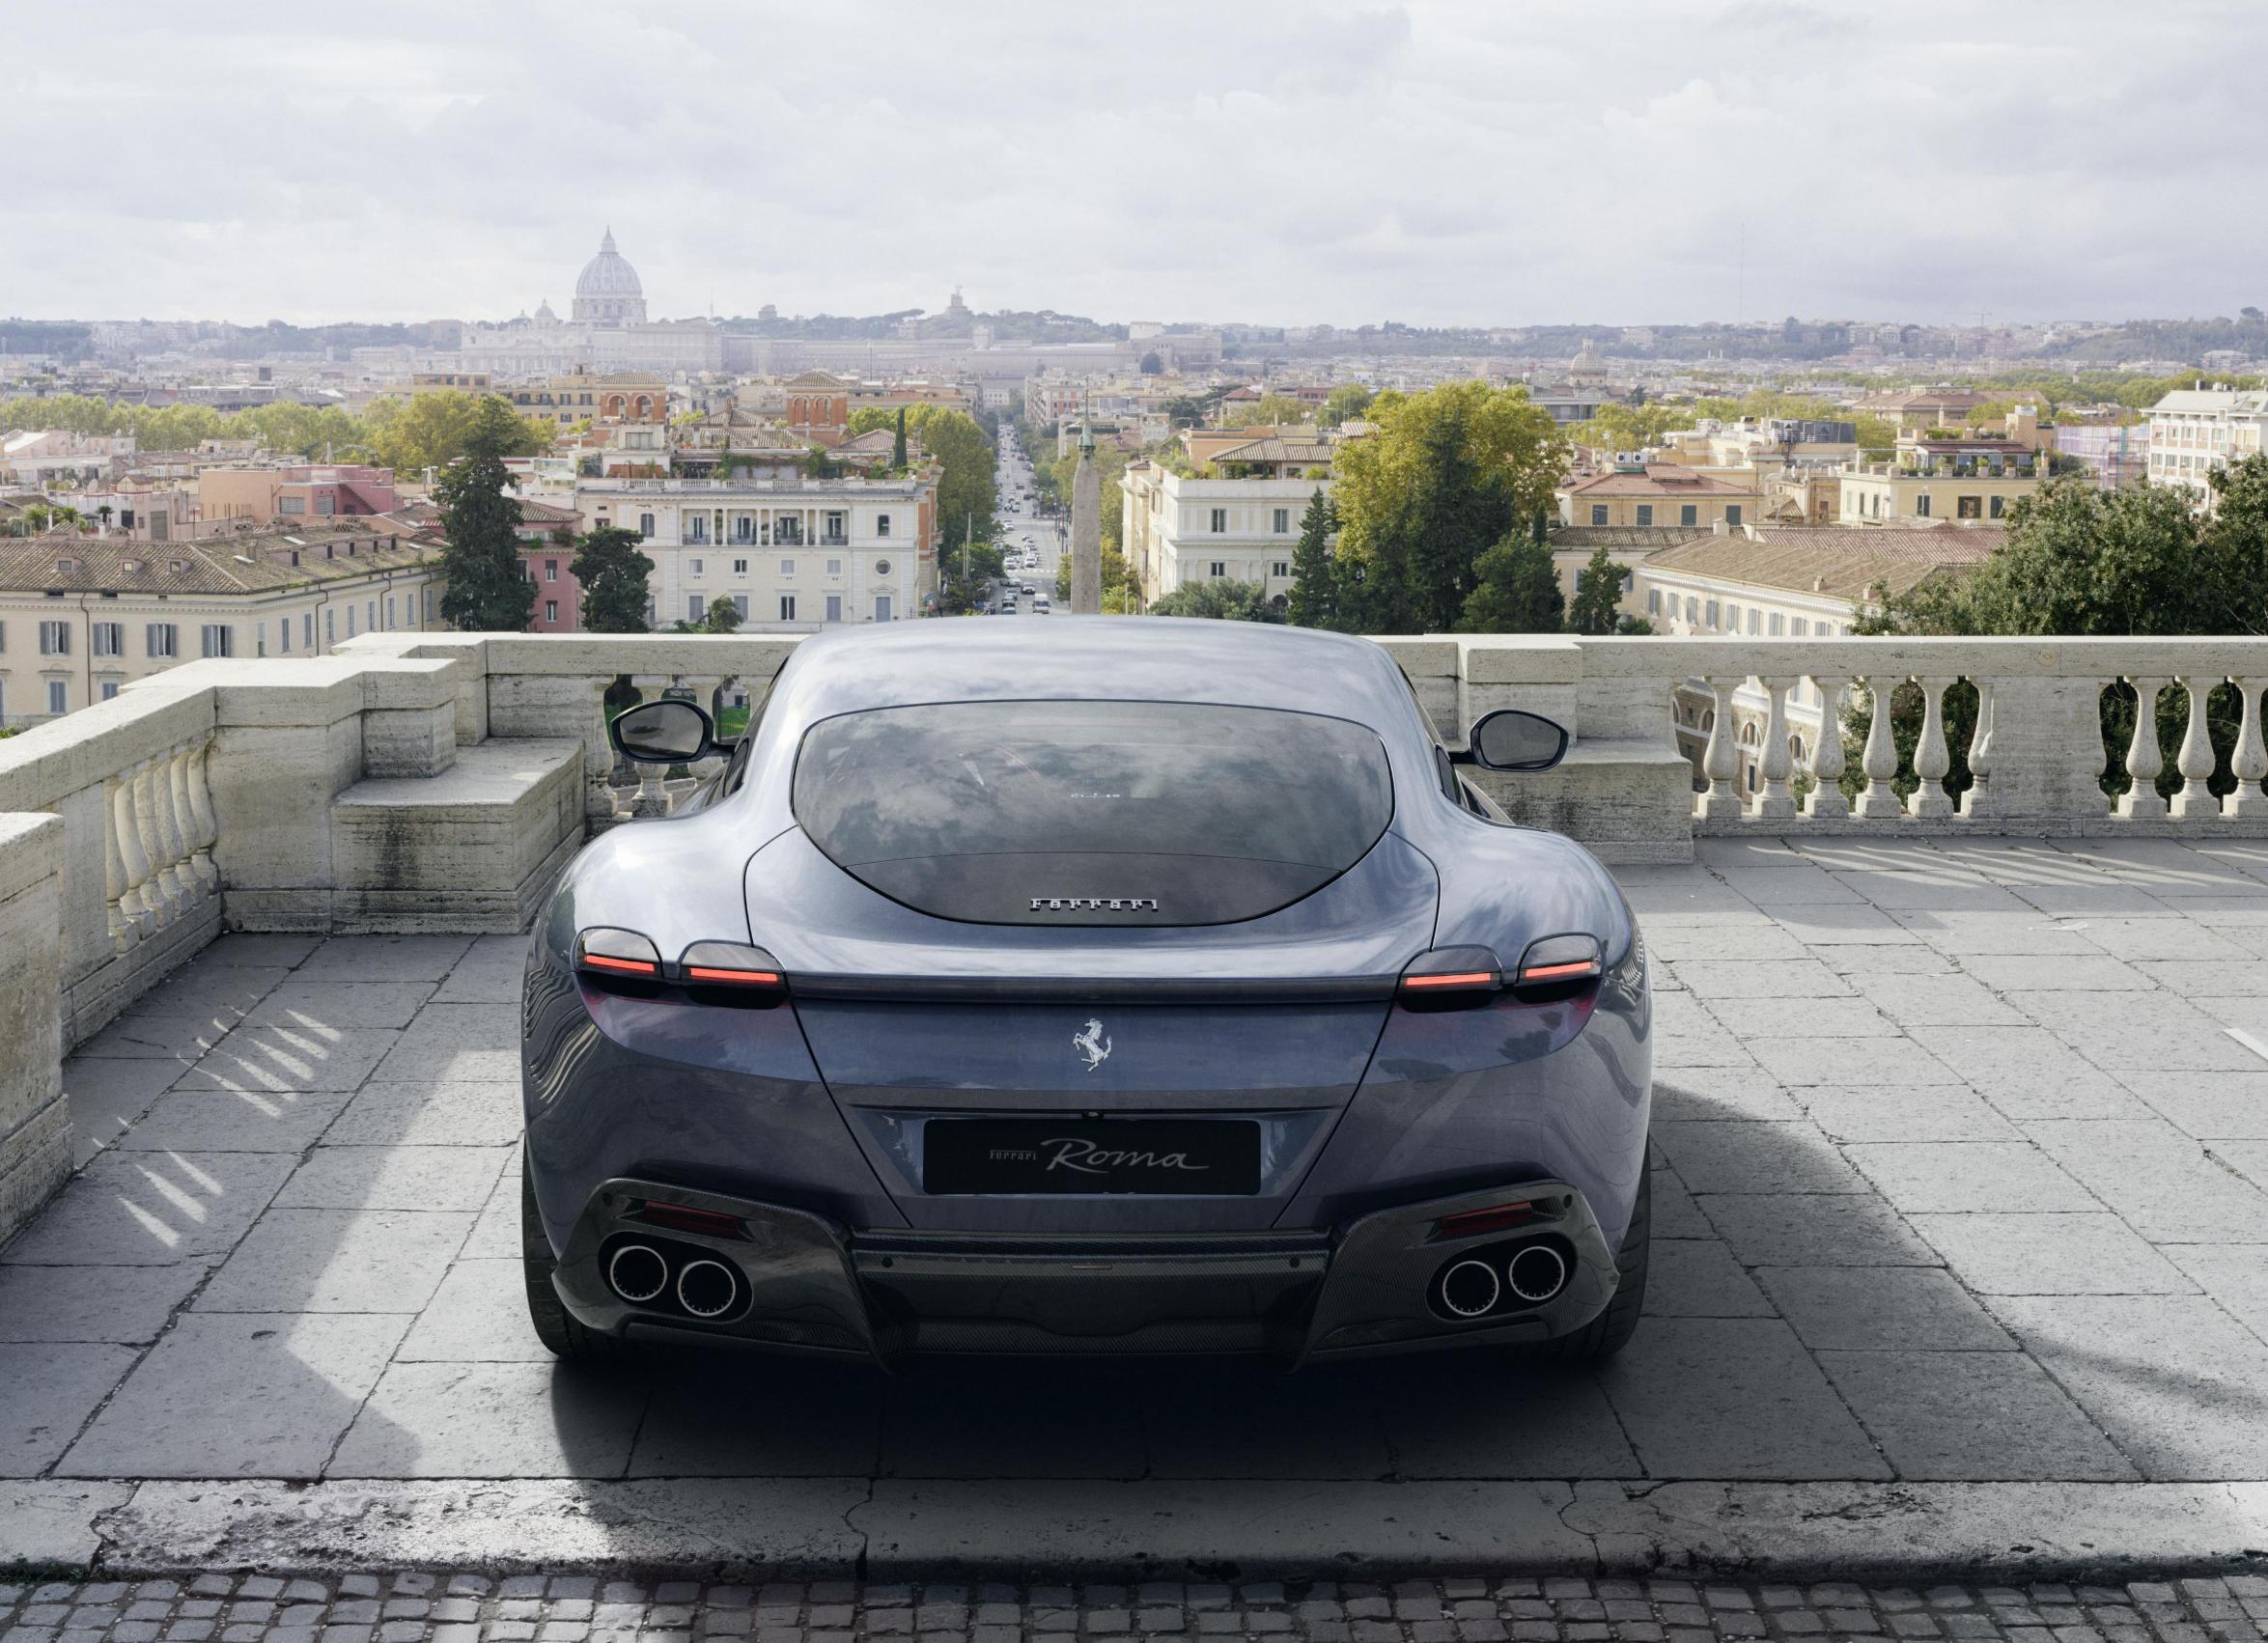 ferrari-2019-sales-total-10131-cars-the-automakers-best-year-ever-140840_1_1